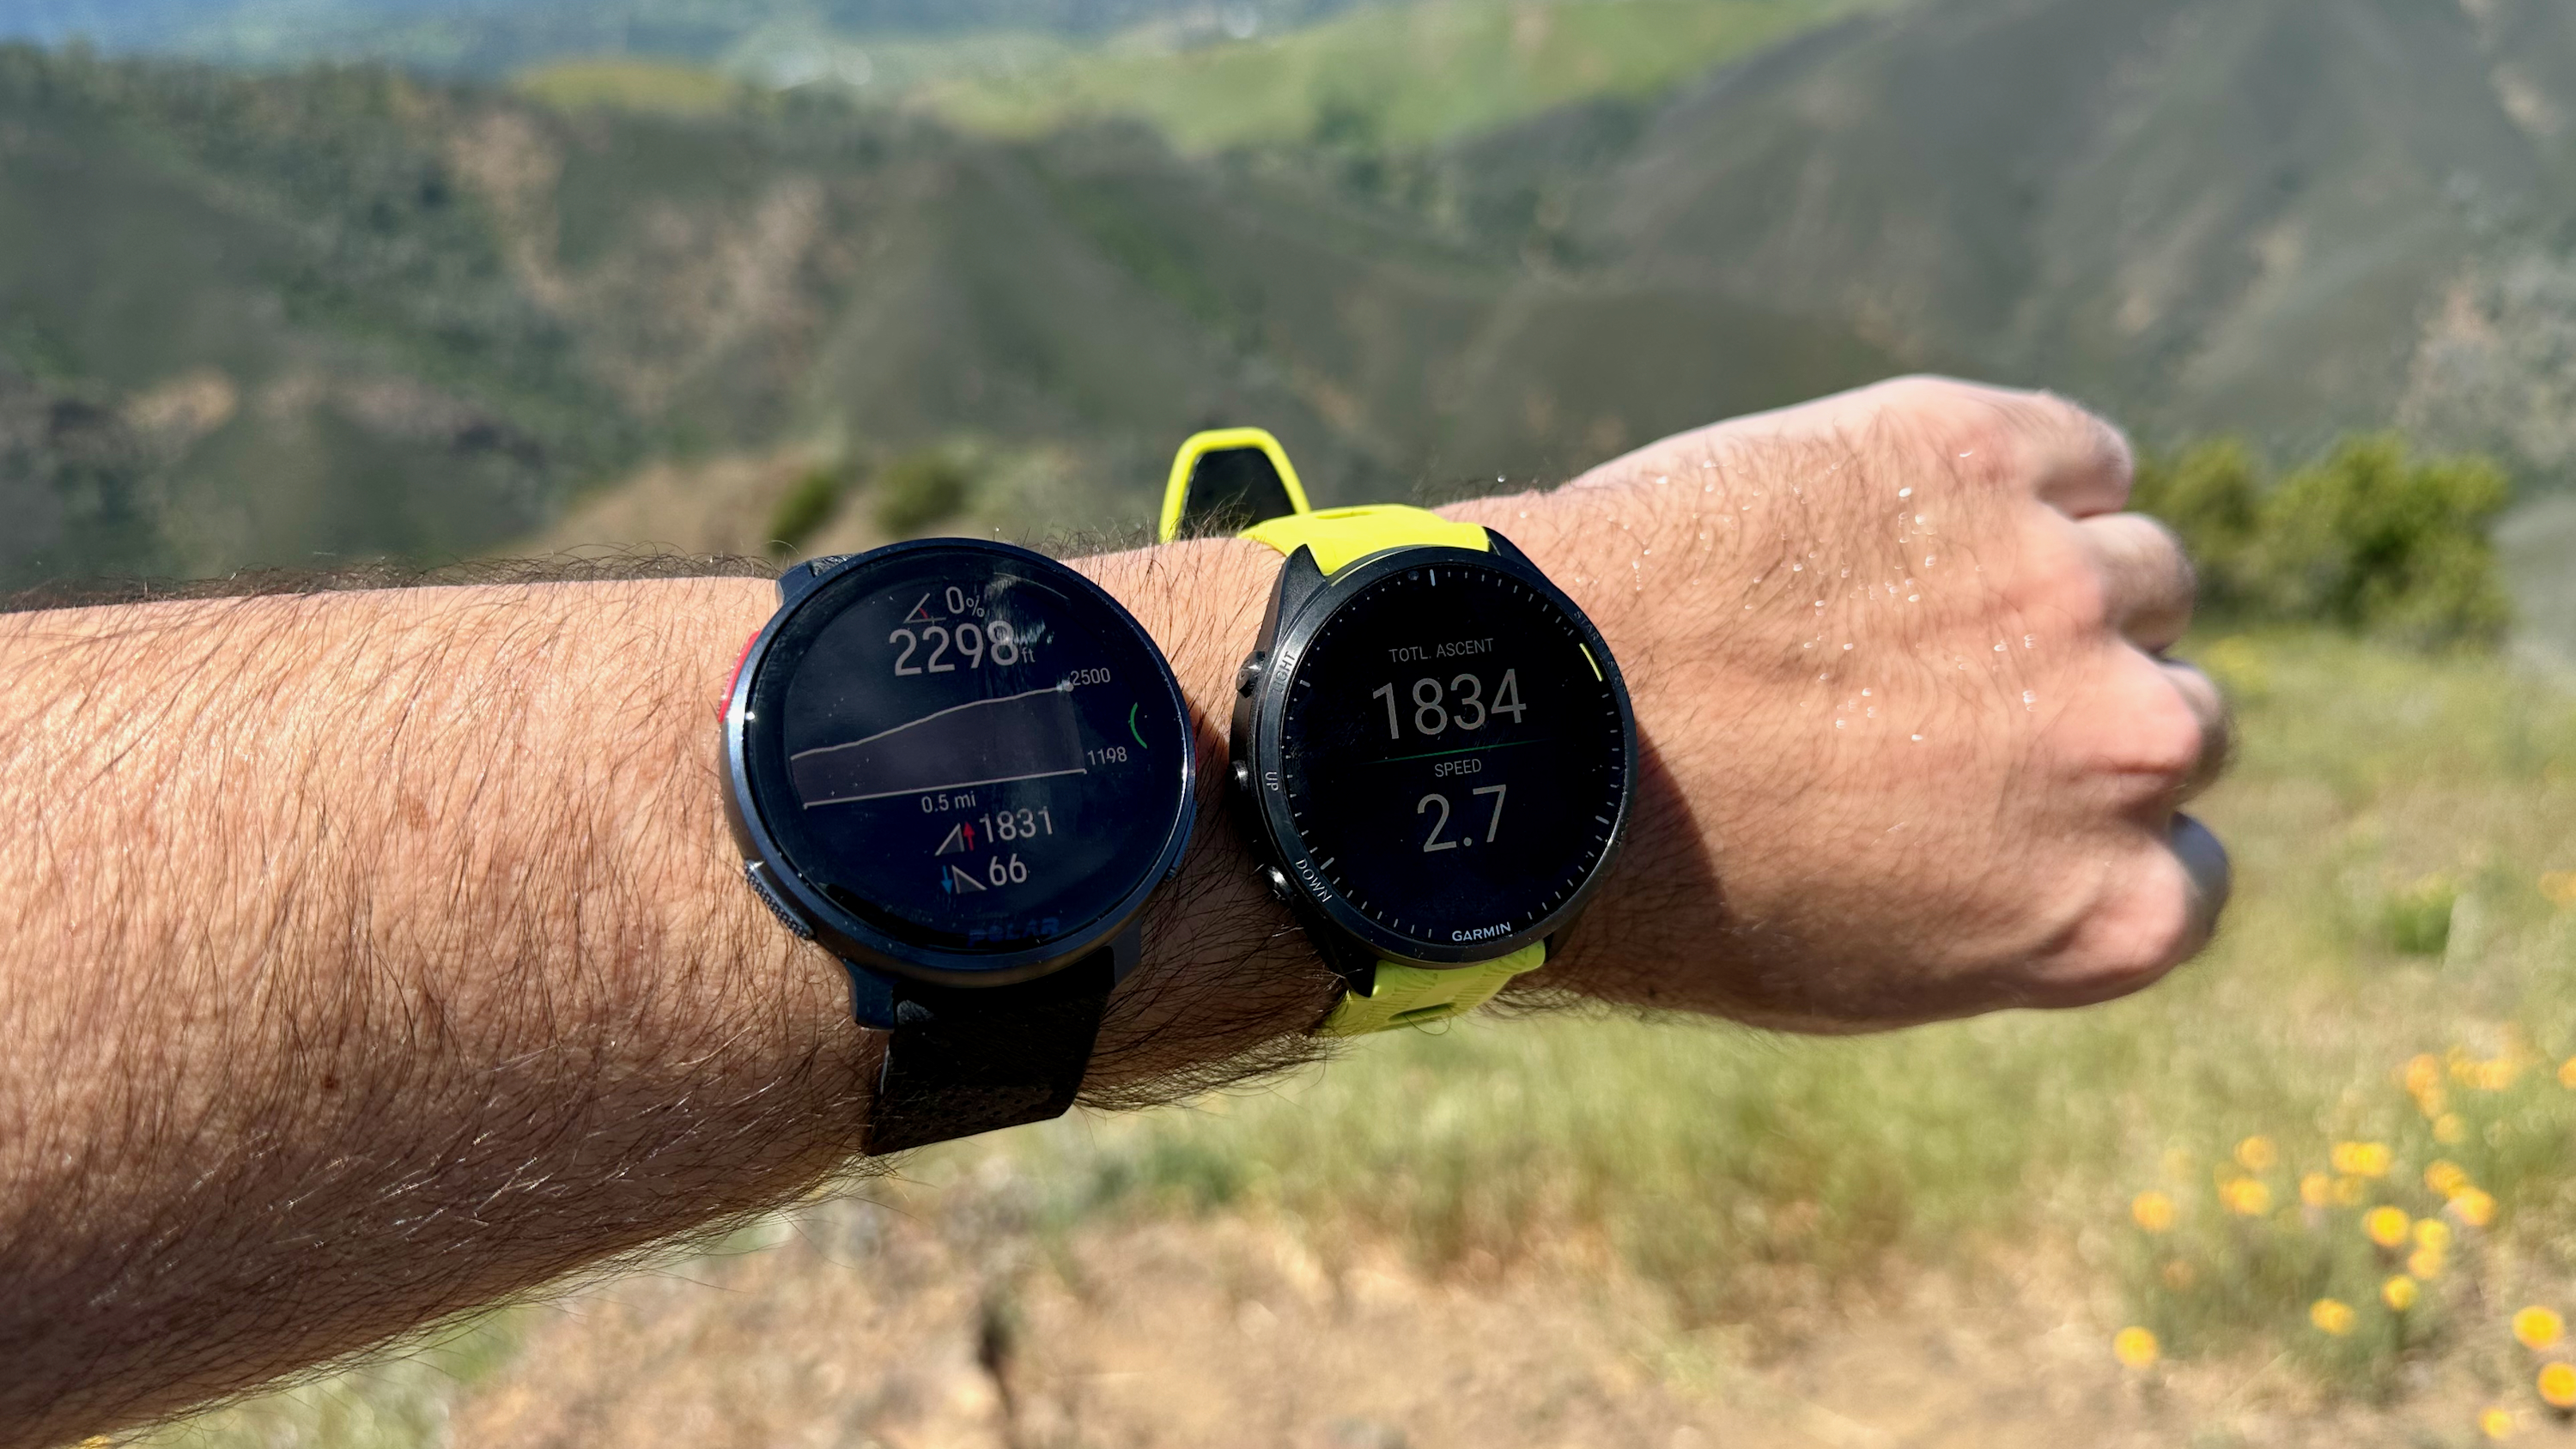 The Garmin Forerunner 965 and Polar Vantage V3 are worn on one arm and display elevation data.